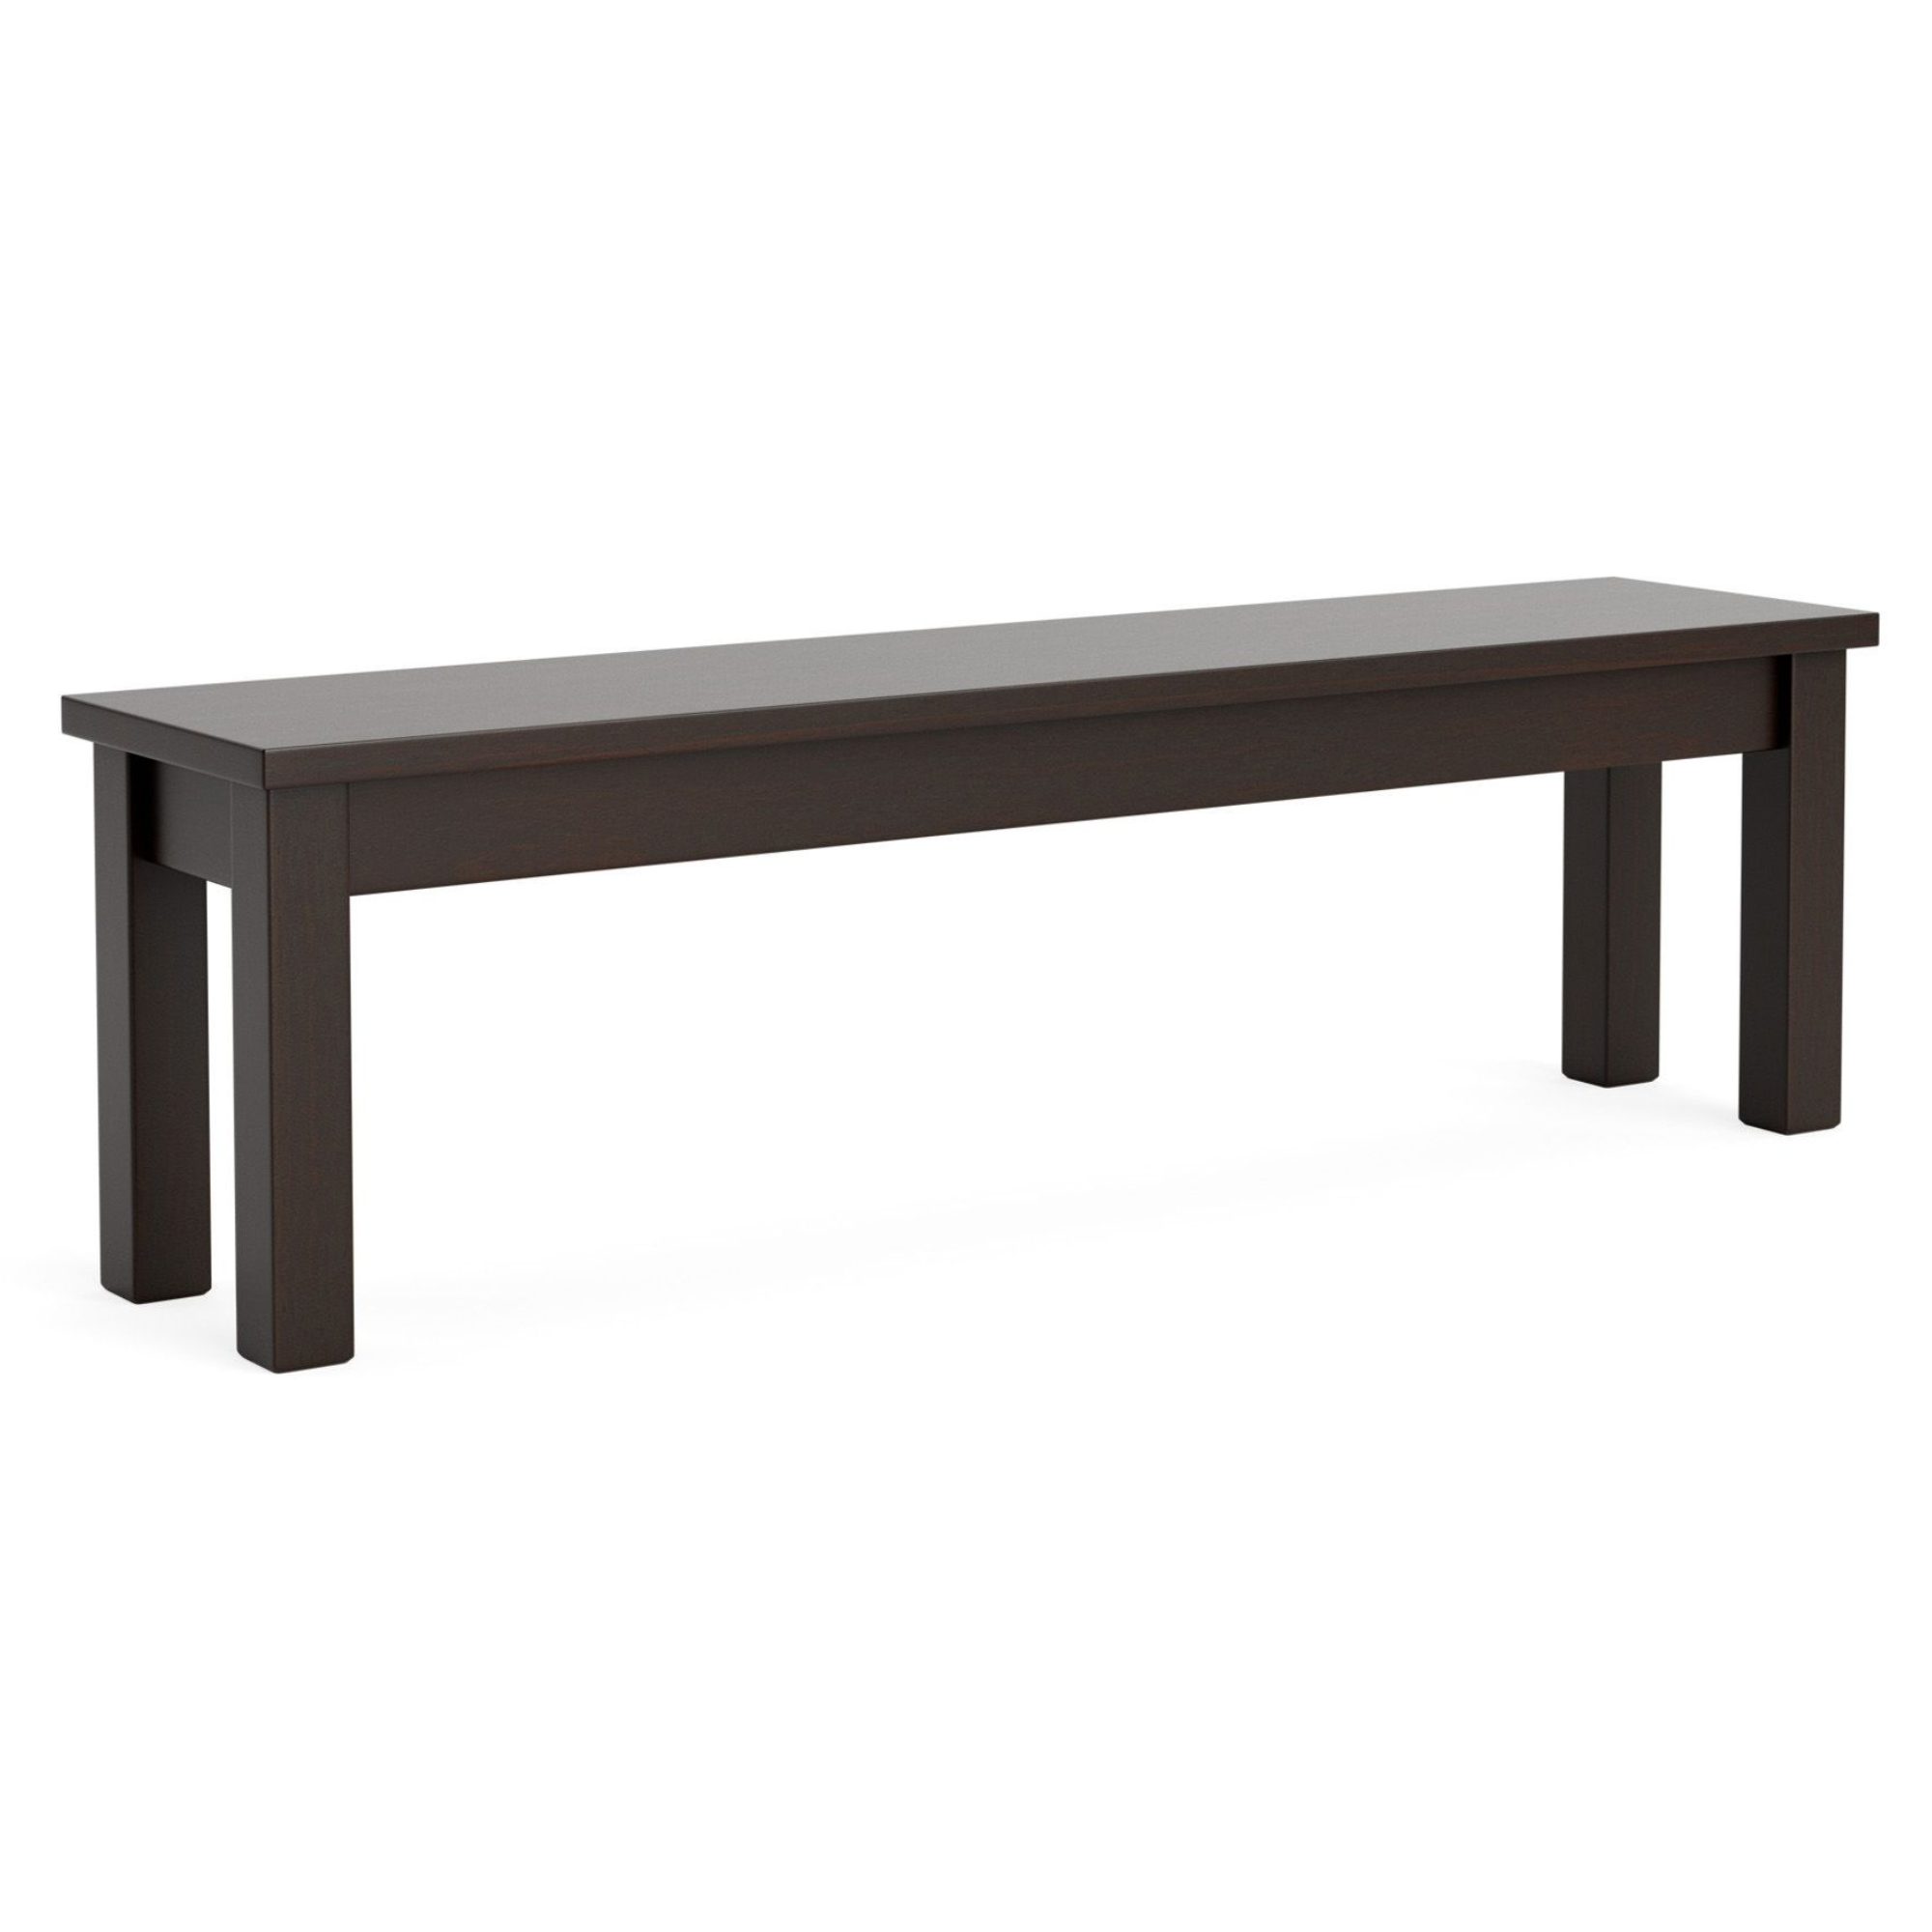 CHARLTON SOLID BENCH SEAT | NZ MADE